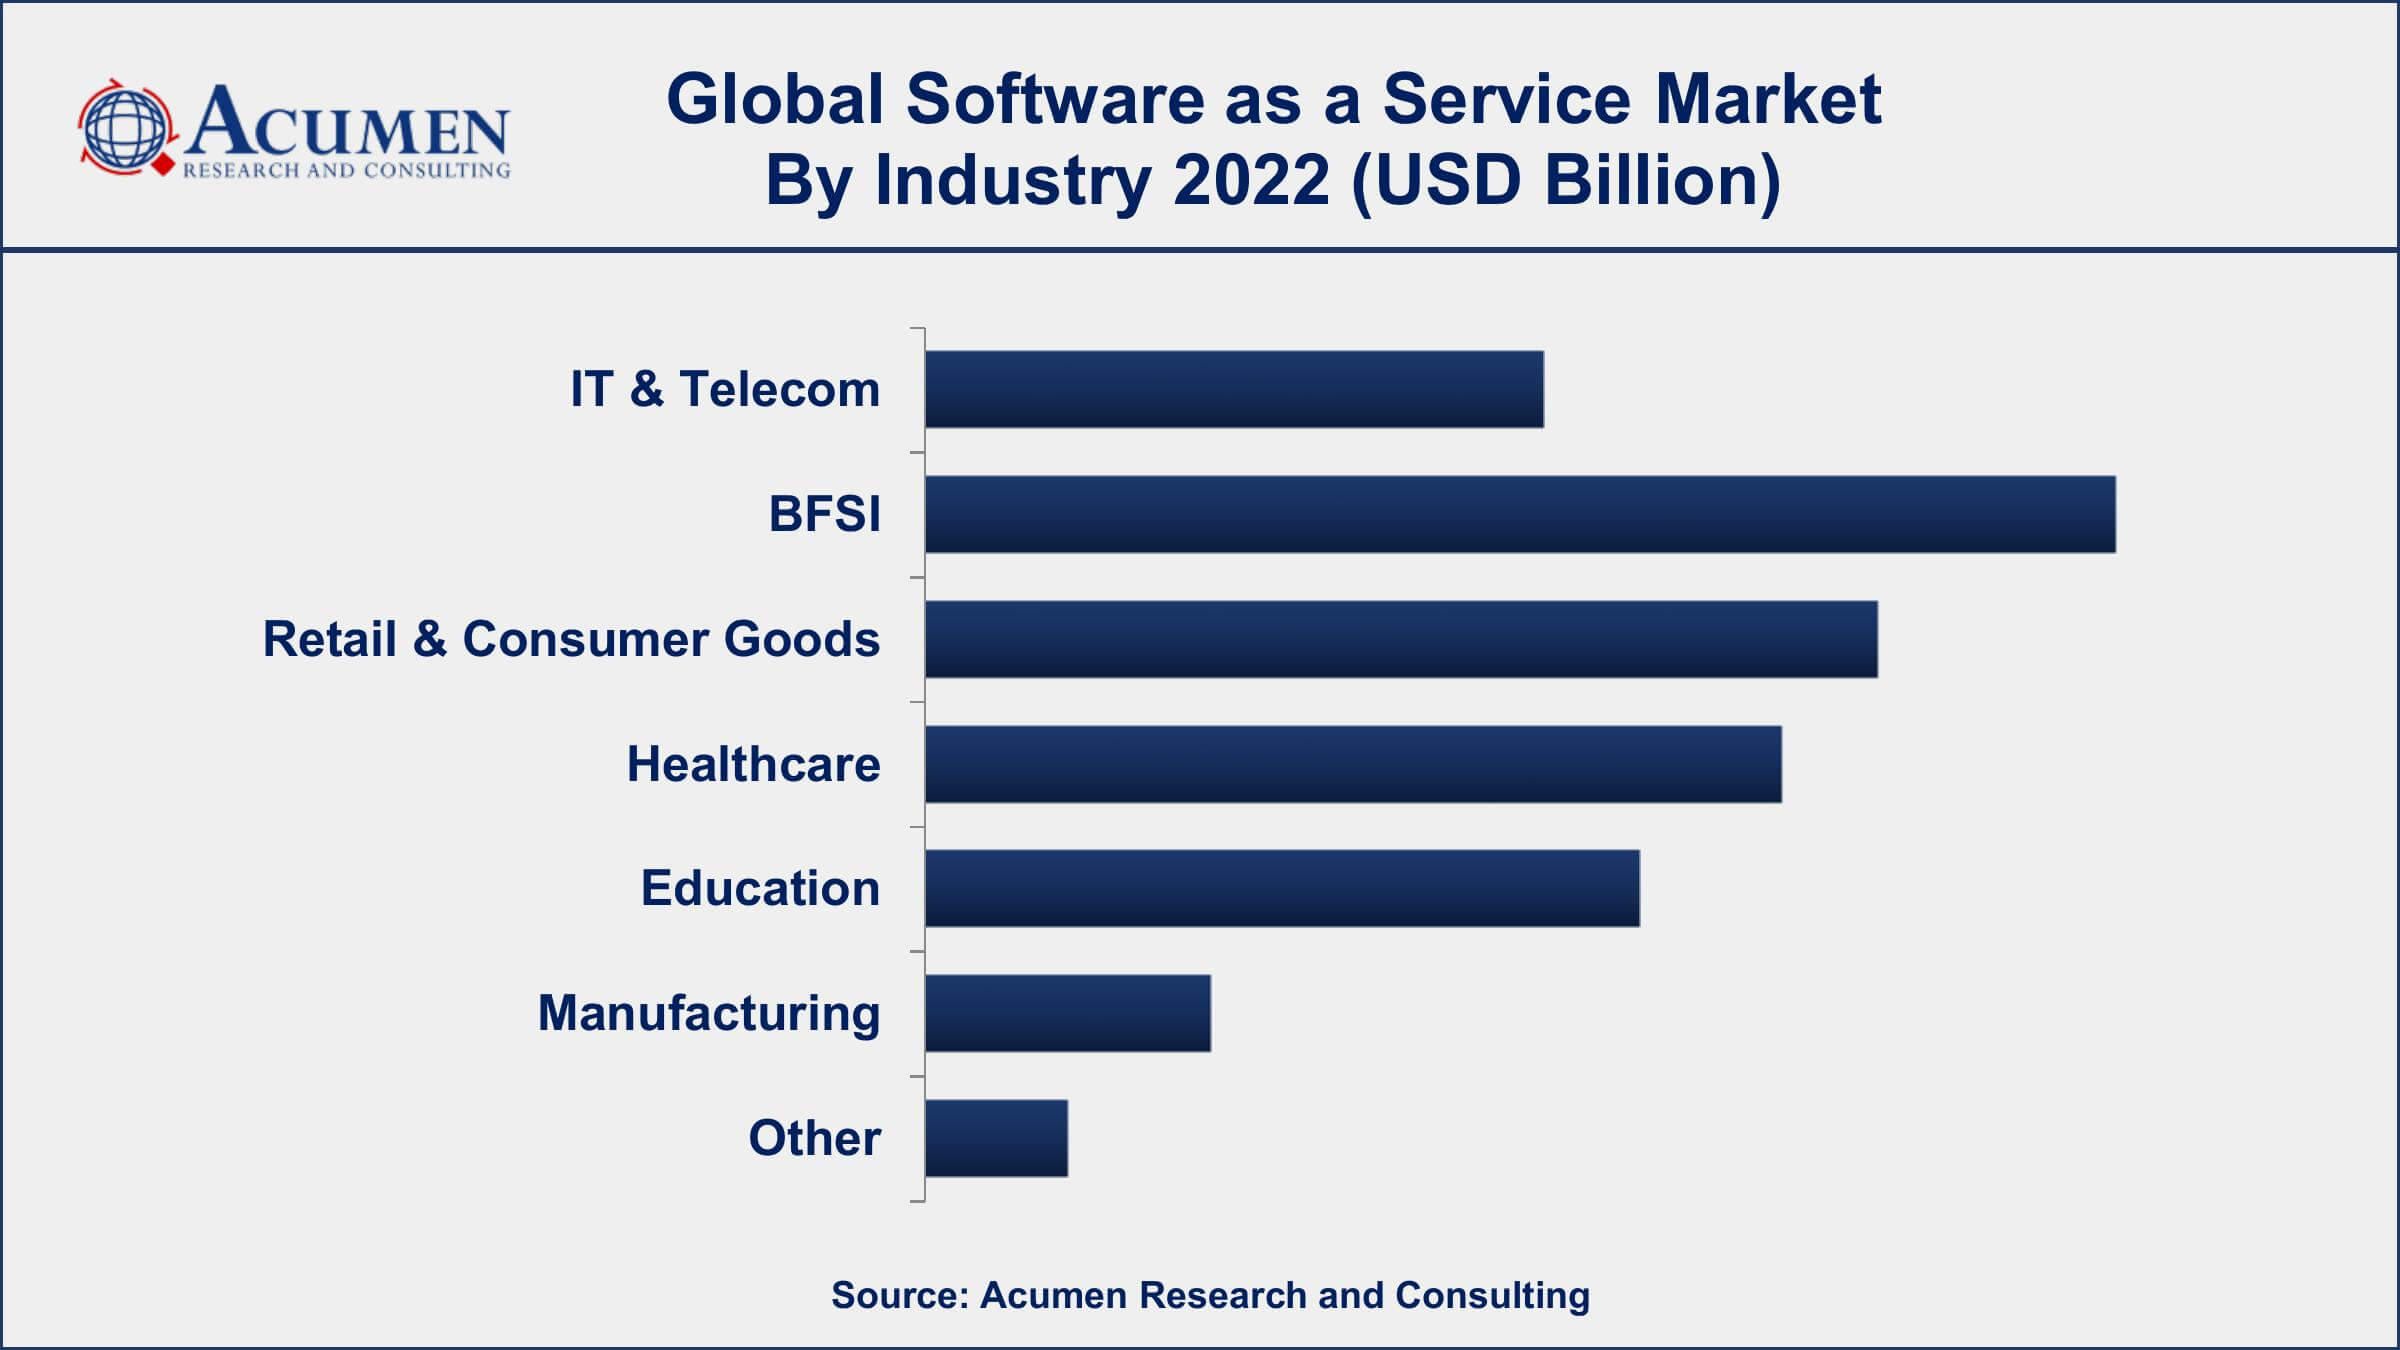 Software as a Service Market Drivers